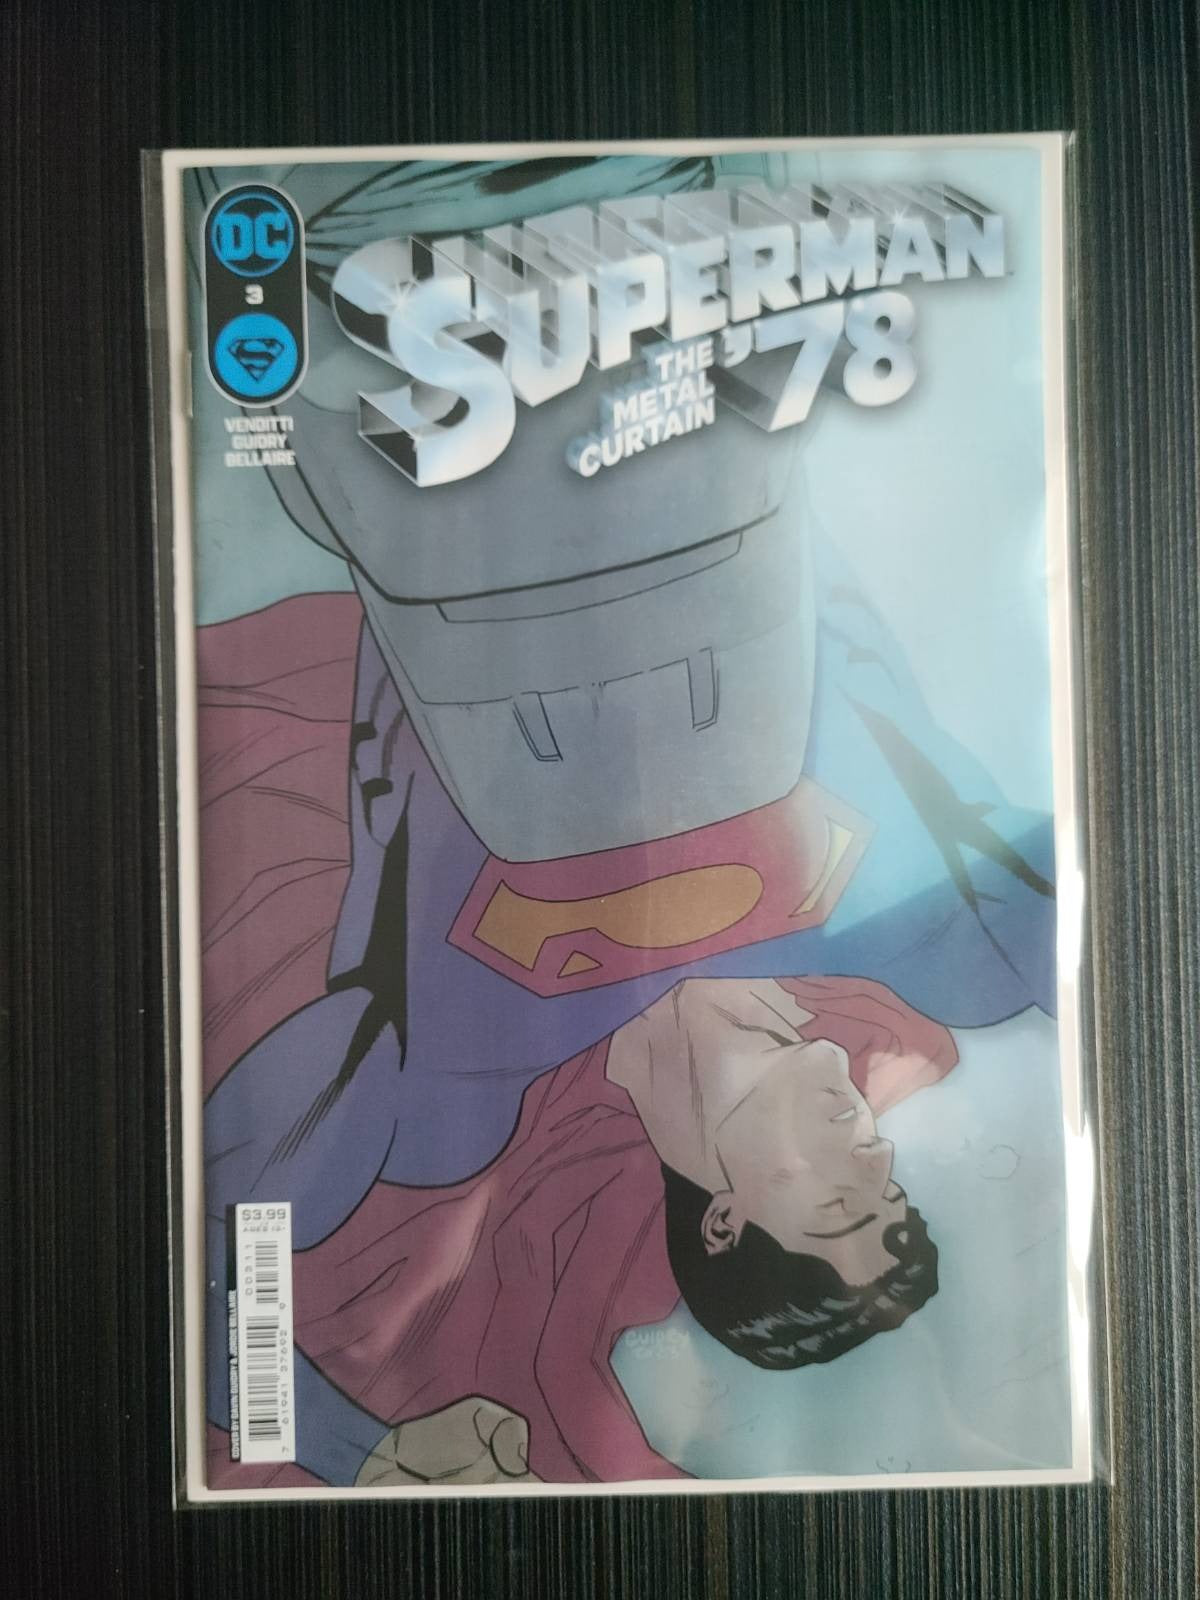 Superman 78 The Metal Curtain #3 (of 6) Cover A Gavin Guidry